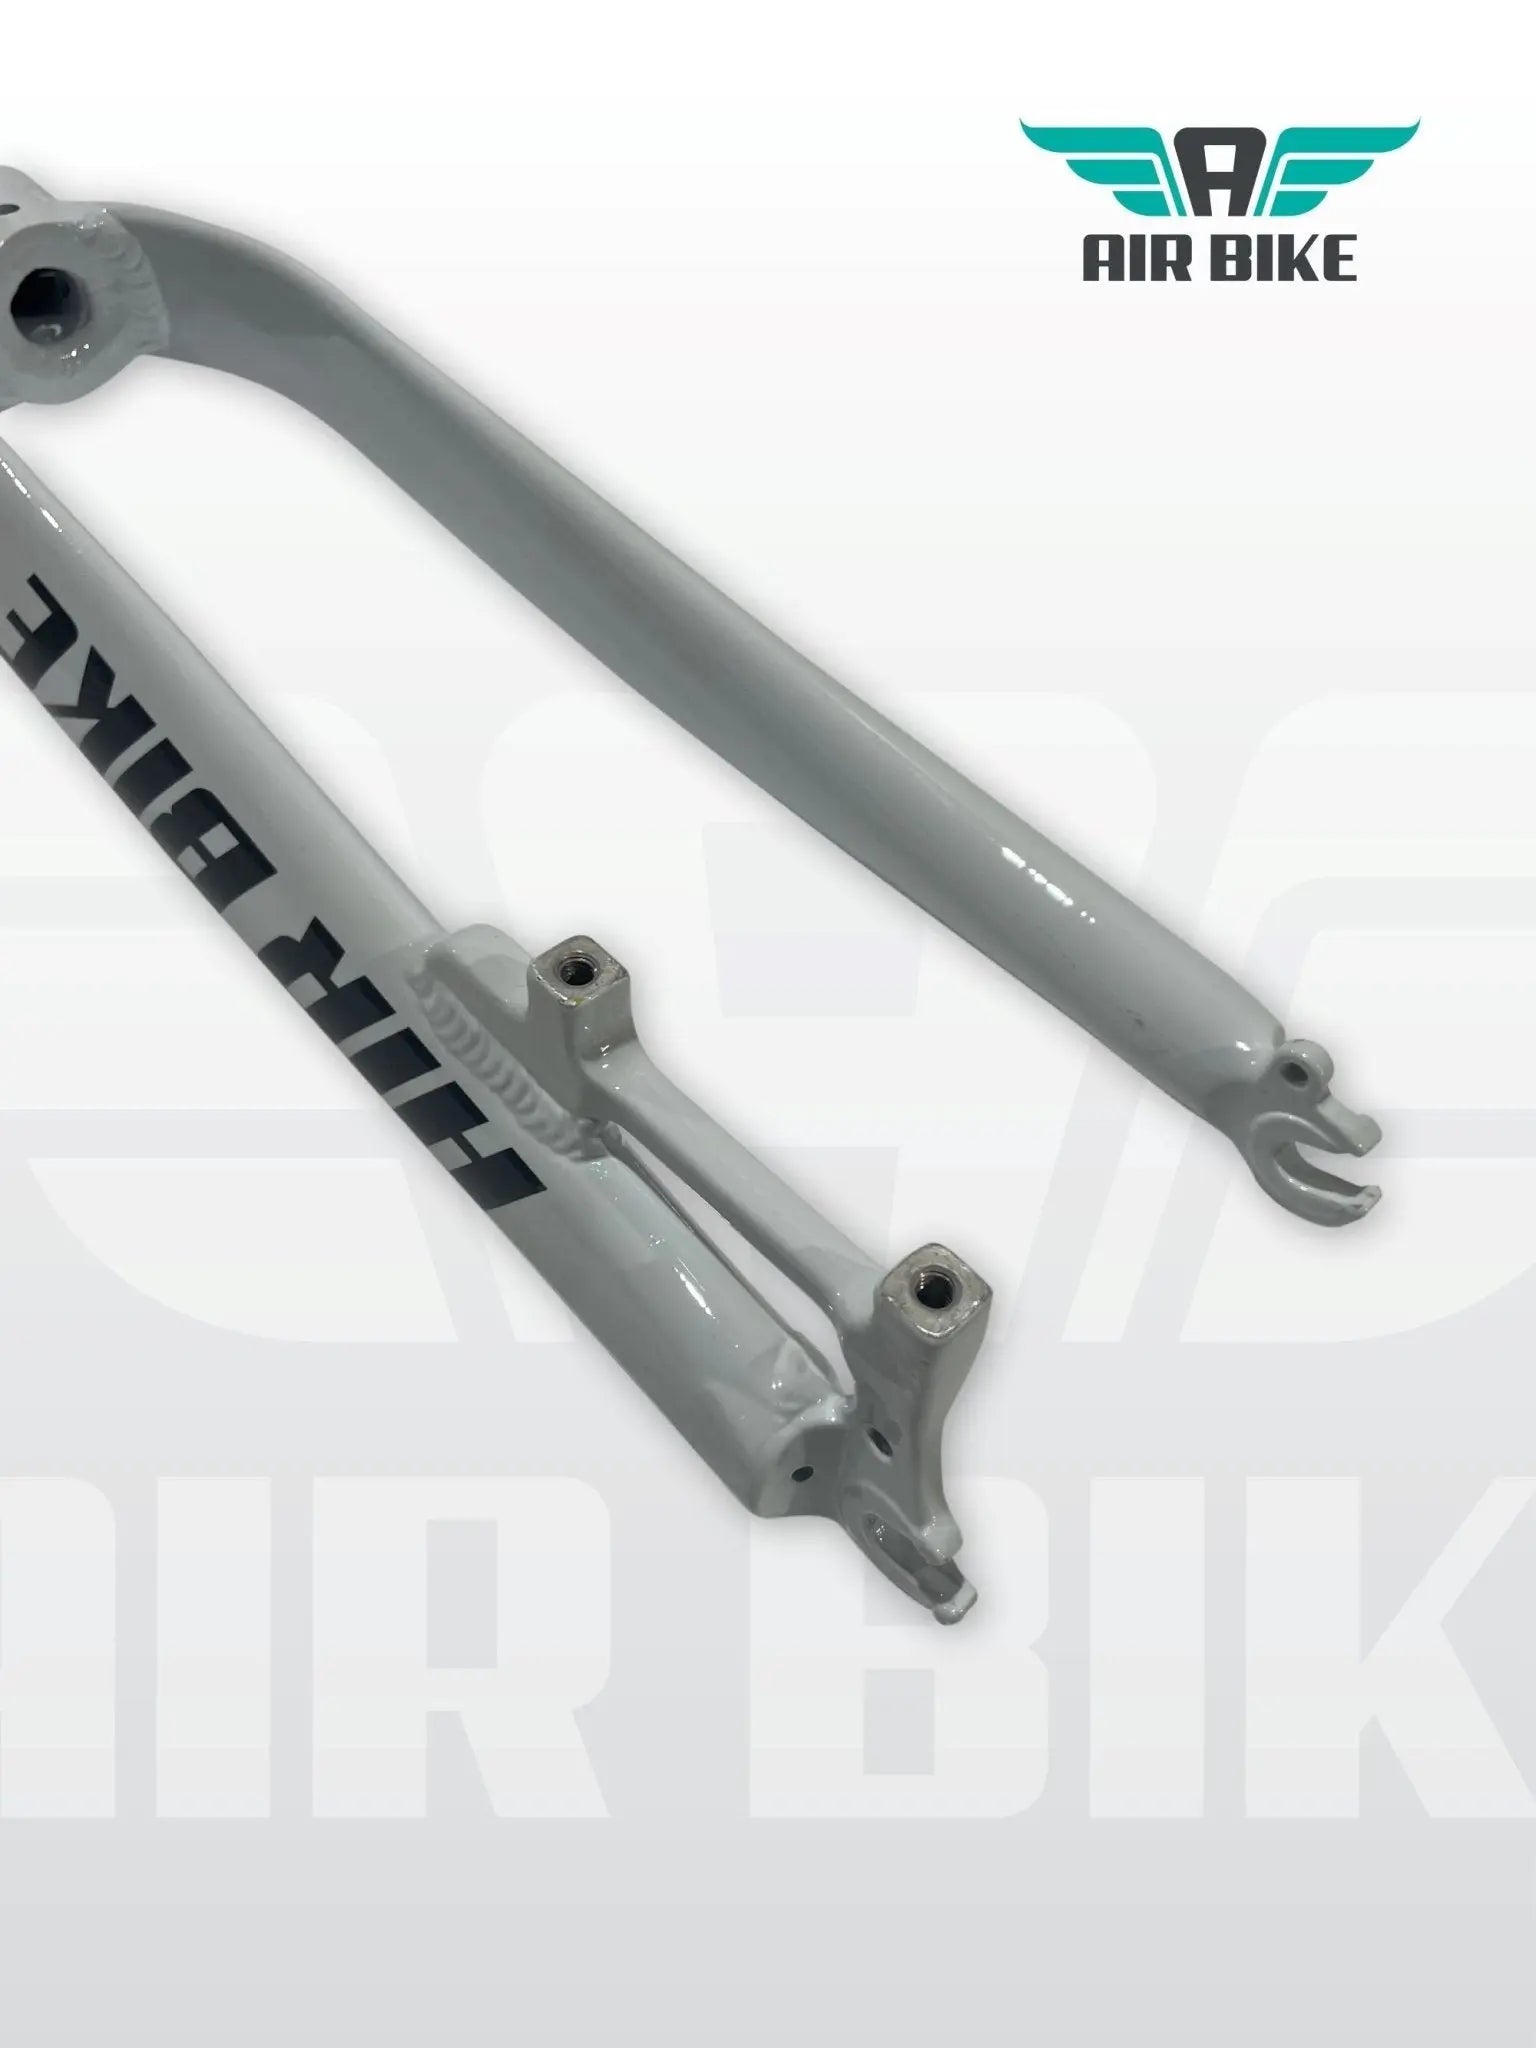 Rigid vs. Suspension: Why a Rigid MTB Fork Might Be Your Perfect Match - Air Bike